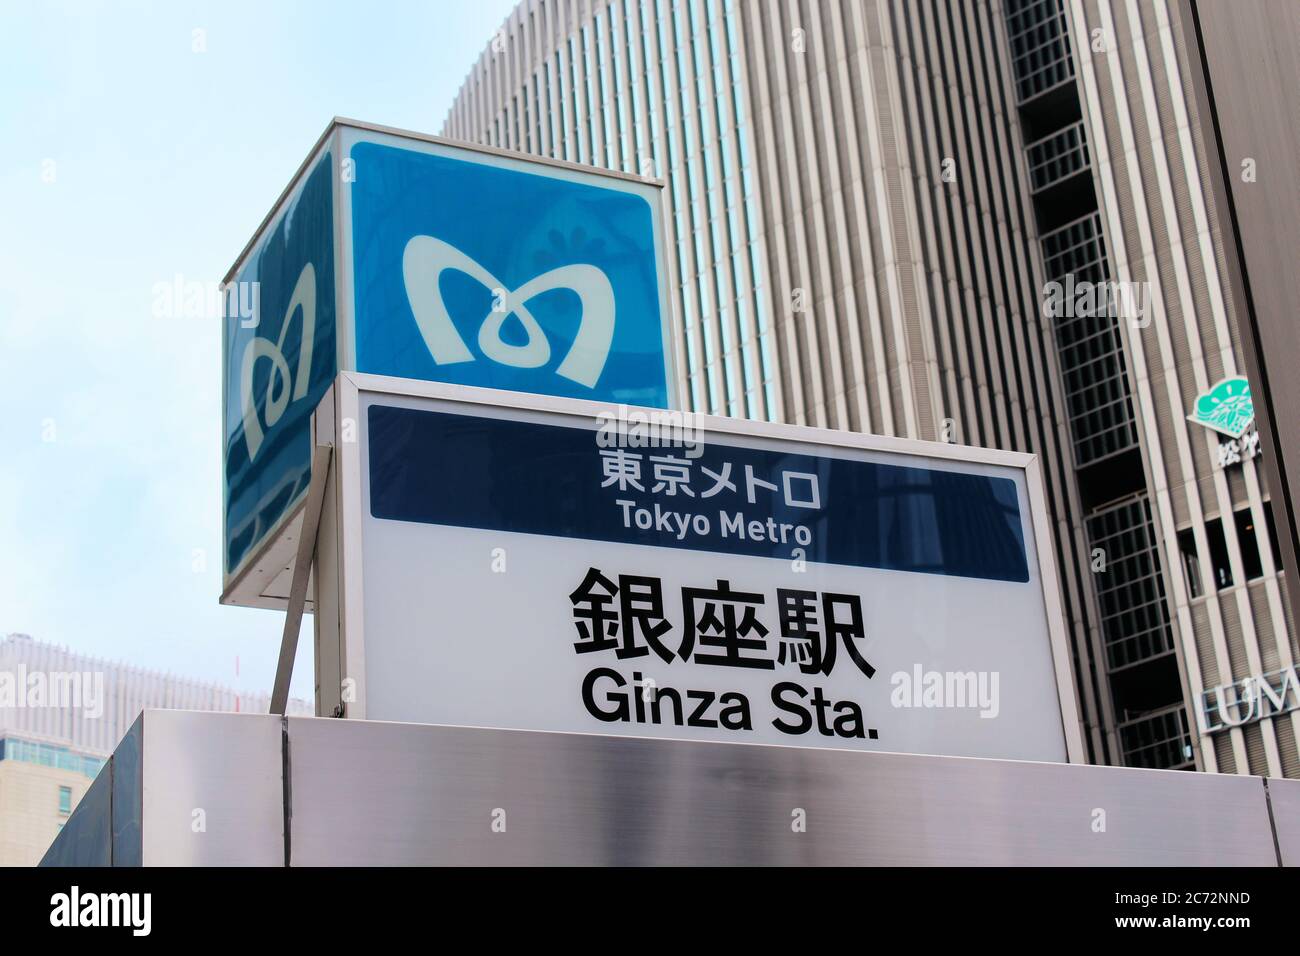 Sign saying 'Tokyo Metro' and 'Ginza Sta.' (Ginza Station) in English and Japanese. Ginza is a popular shopping and entertainment district in Tokyo. Stock Photo